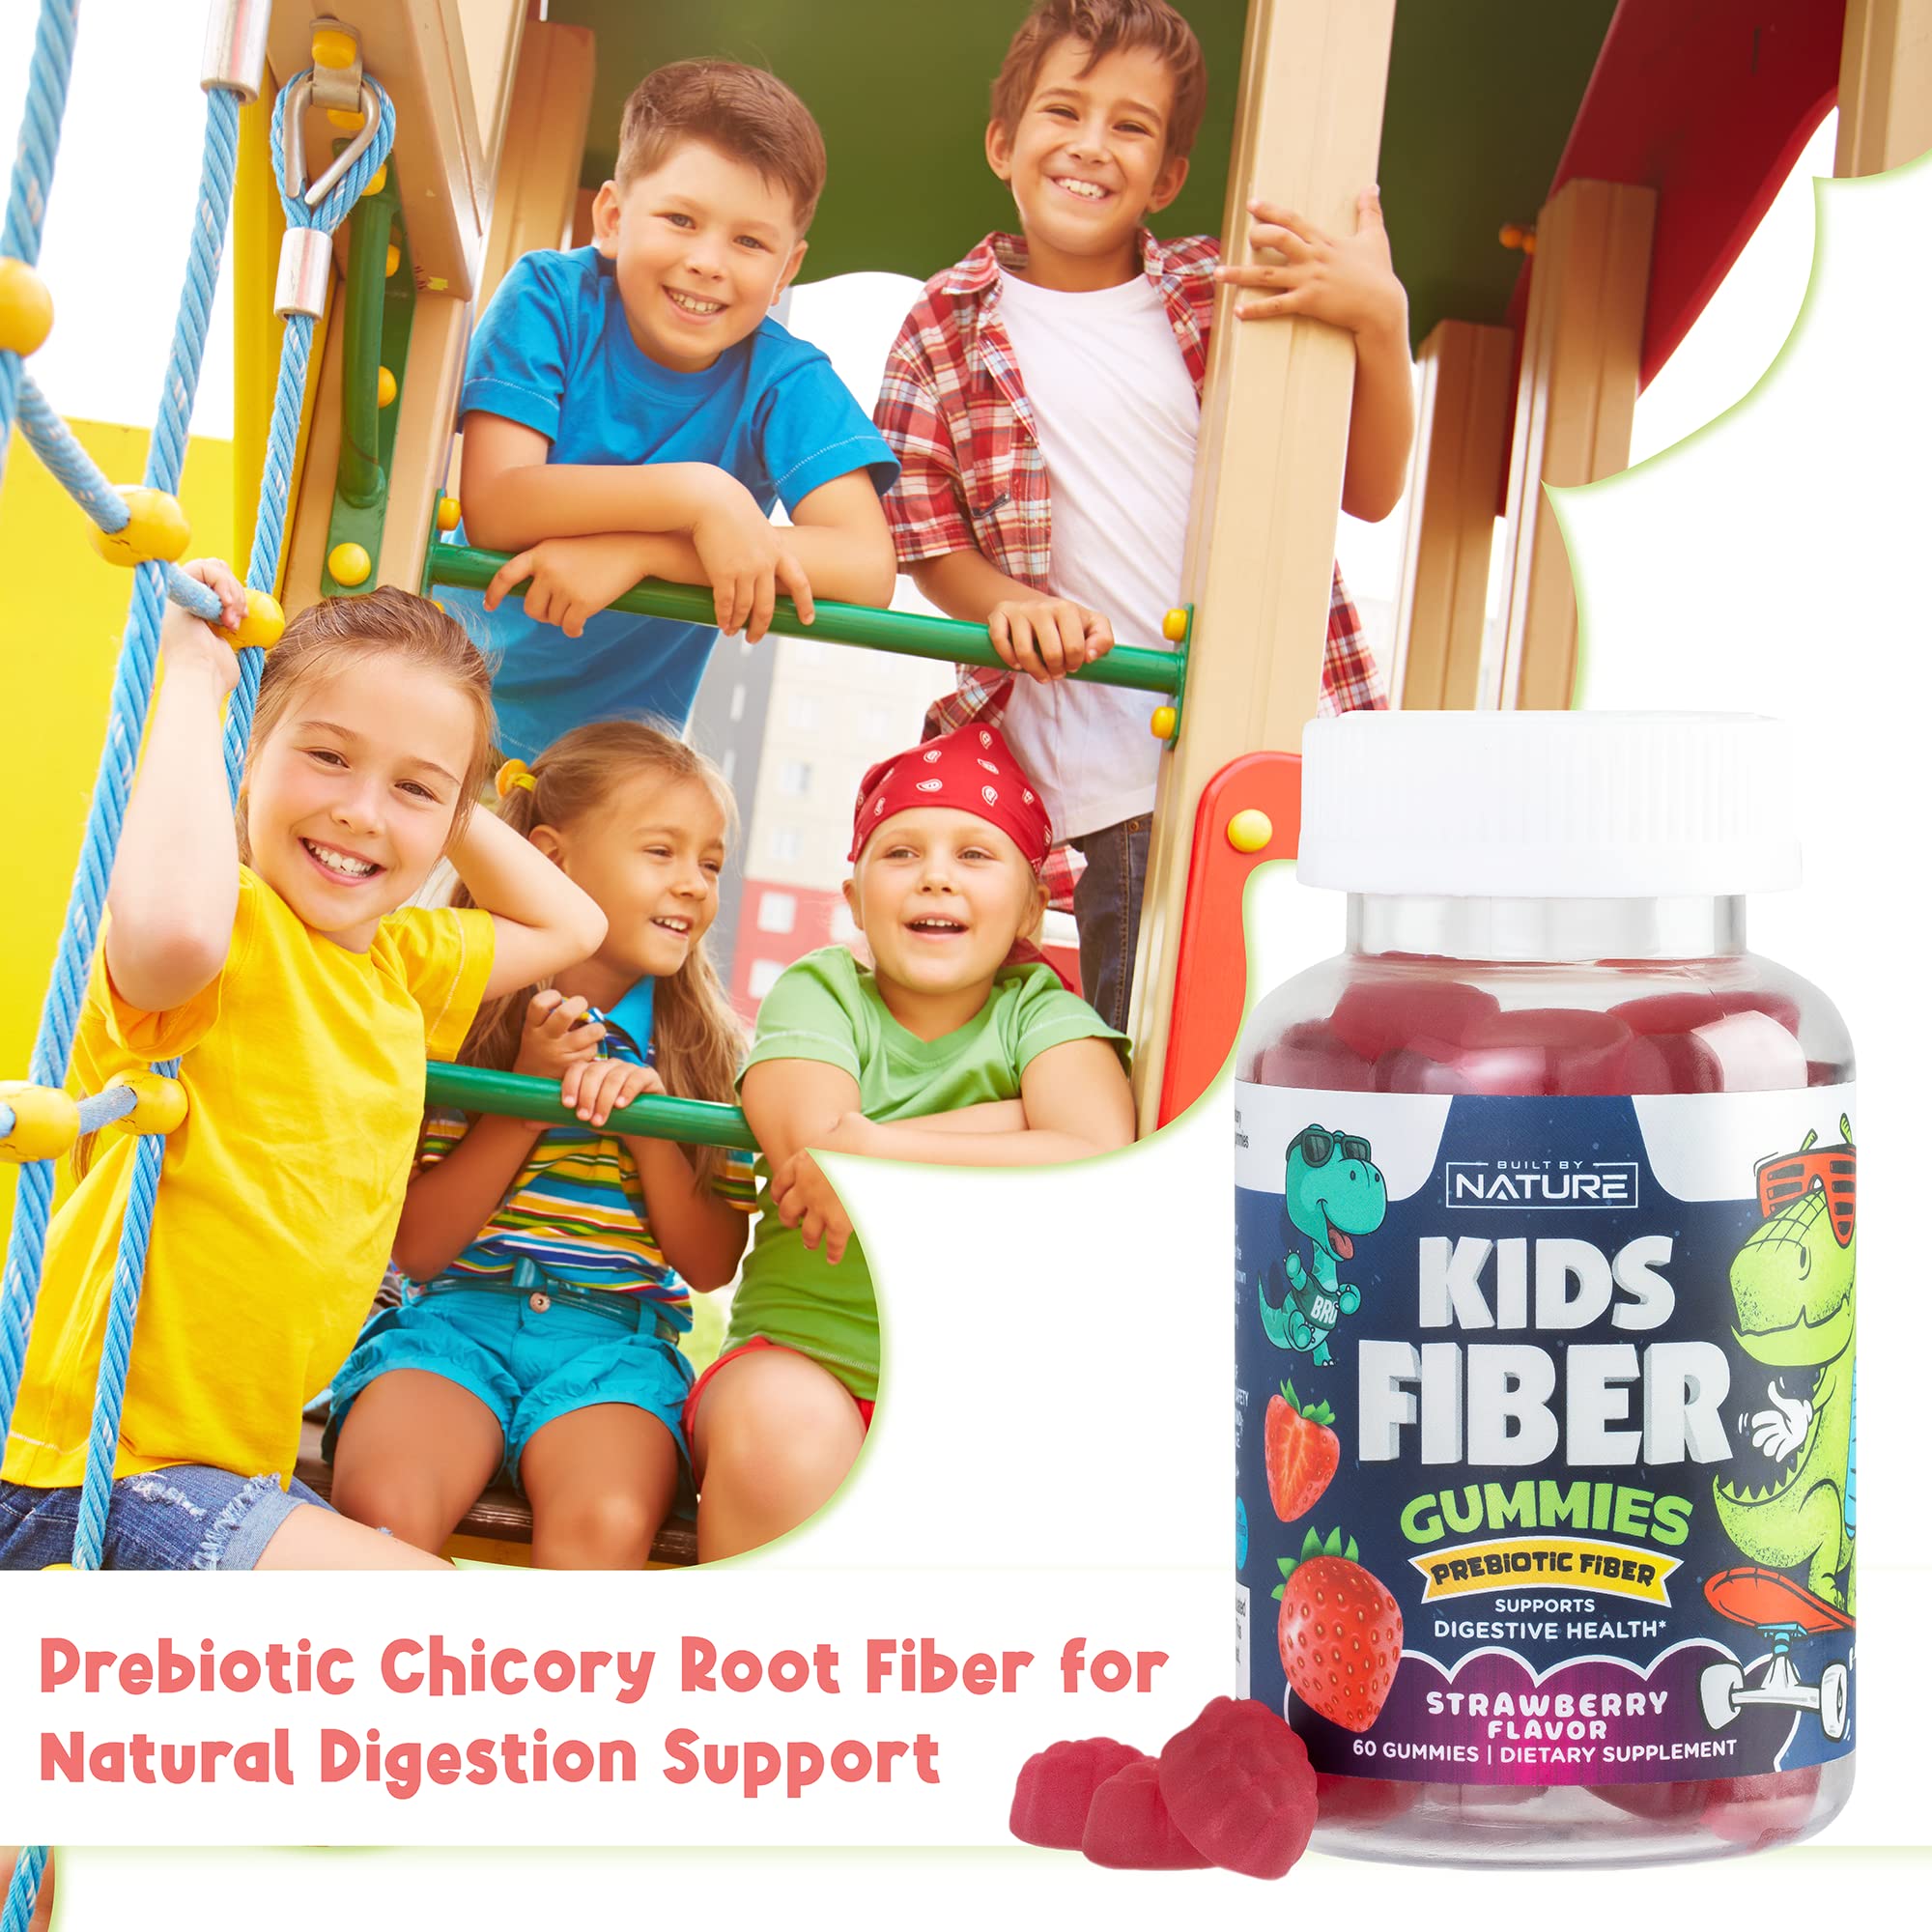 Kids Fiber Gummies, Daily Chicory Root Fiber Supplement, Plant Based, Non-GMO, for Digestive and Intestinal Gut Health, Low Sugar Prebiotic Fiber Gummy for Children, Strawberry Flavored, 60 Gummies